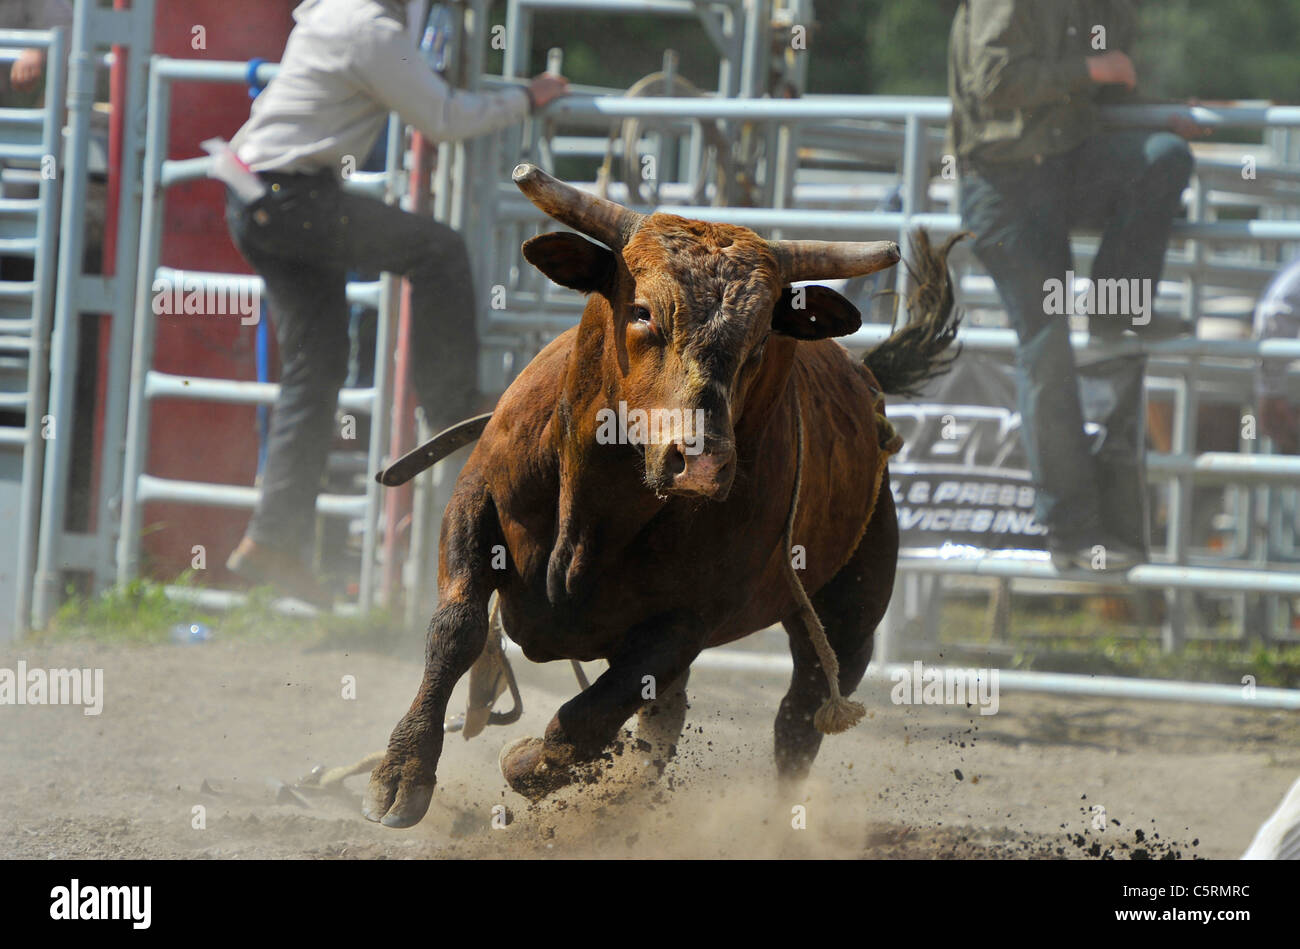 A rodeo bucking bull charges after a competitor in the rodeo arena Stock Photo